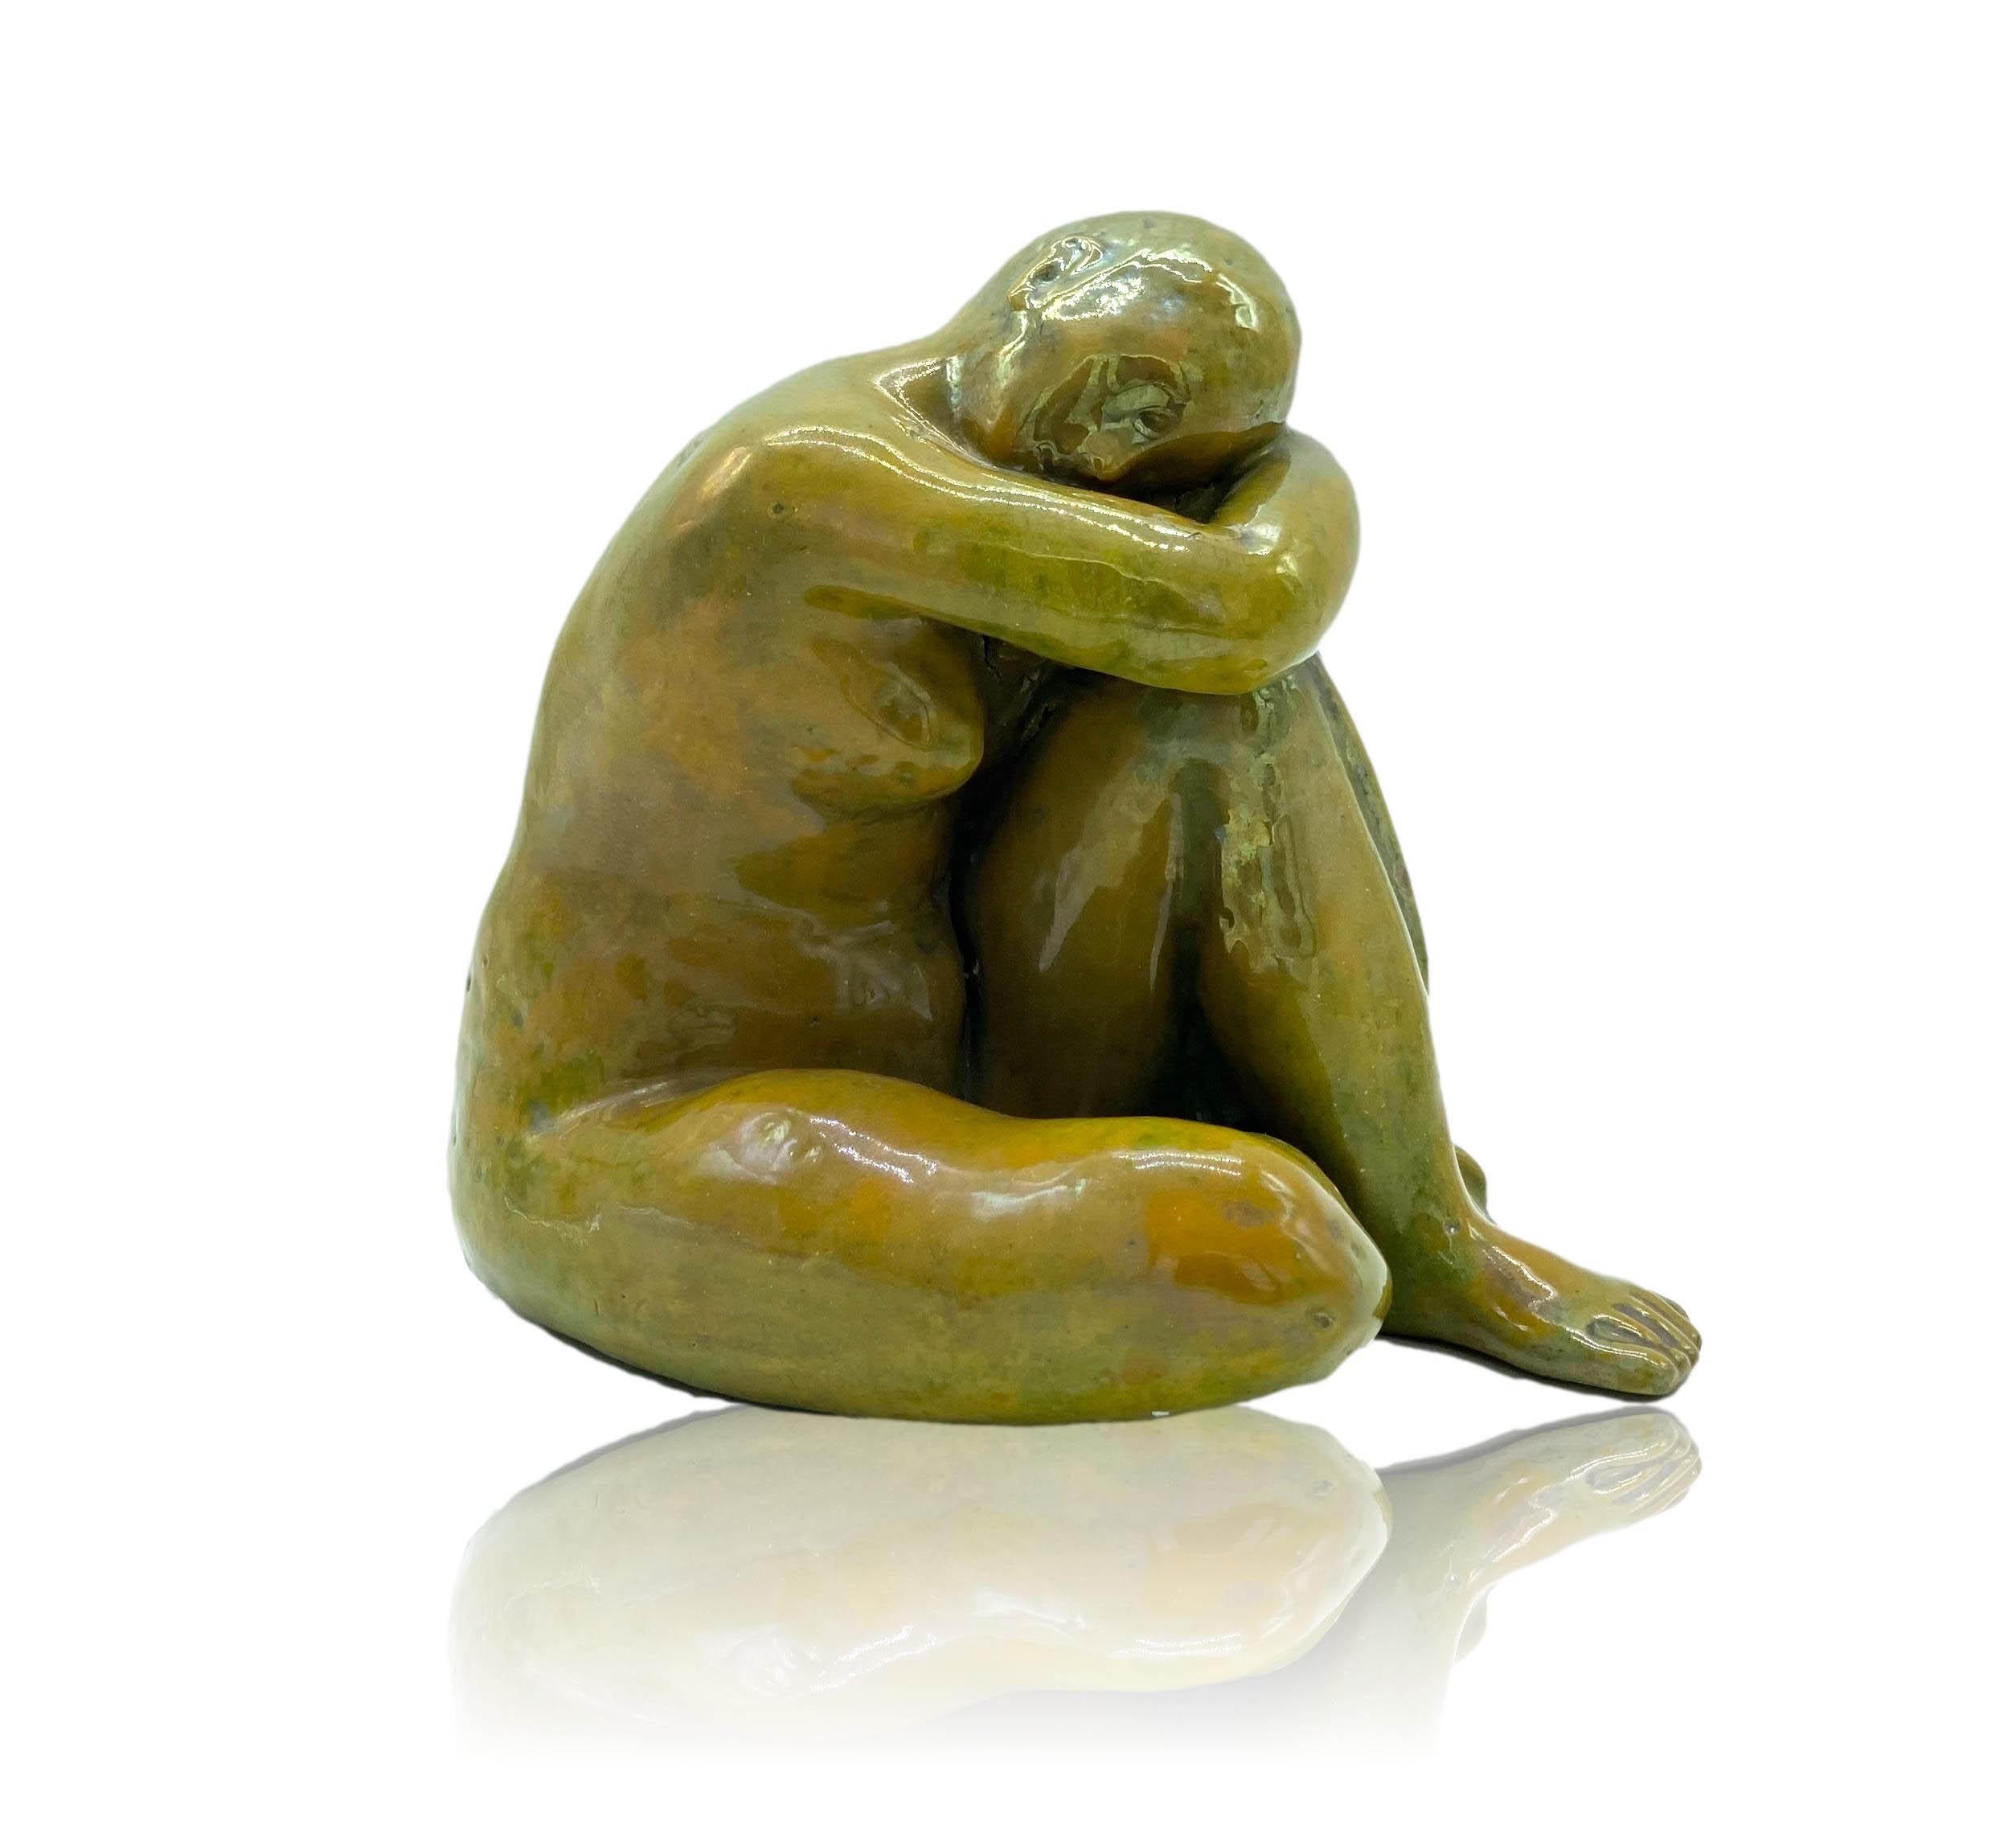 Yellow glazed terracotta sculpture depicting a seated woman with her head resting on her knee, 1960.